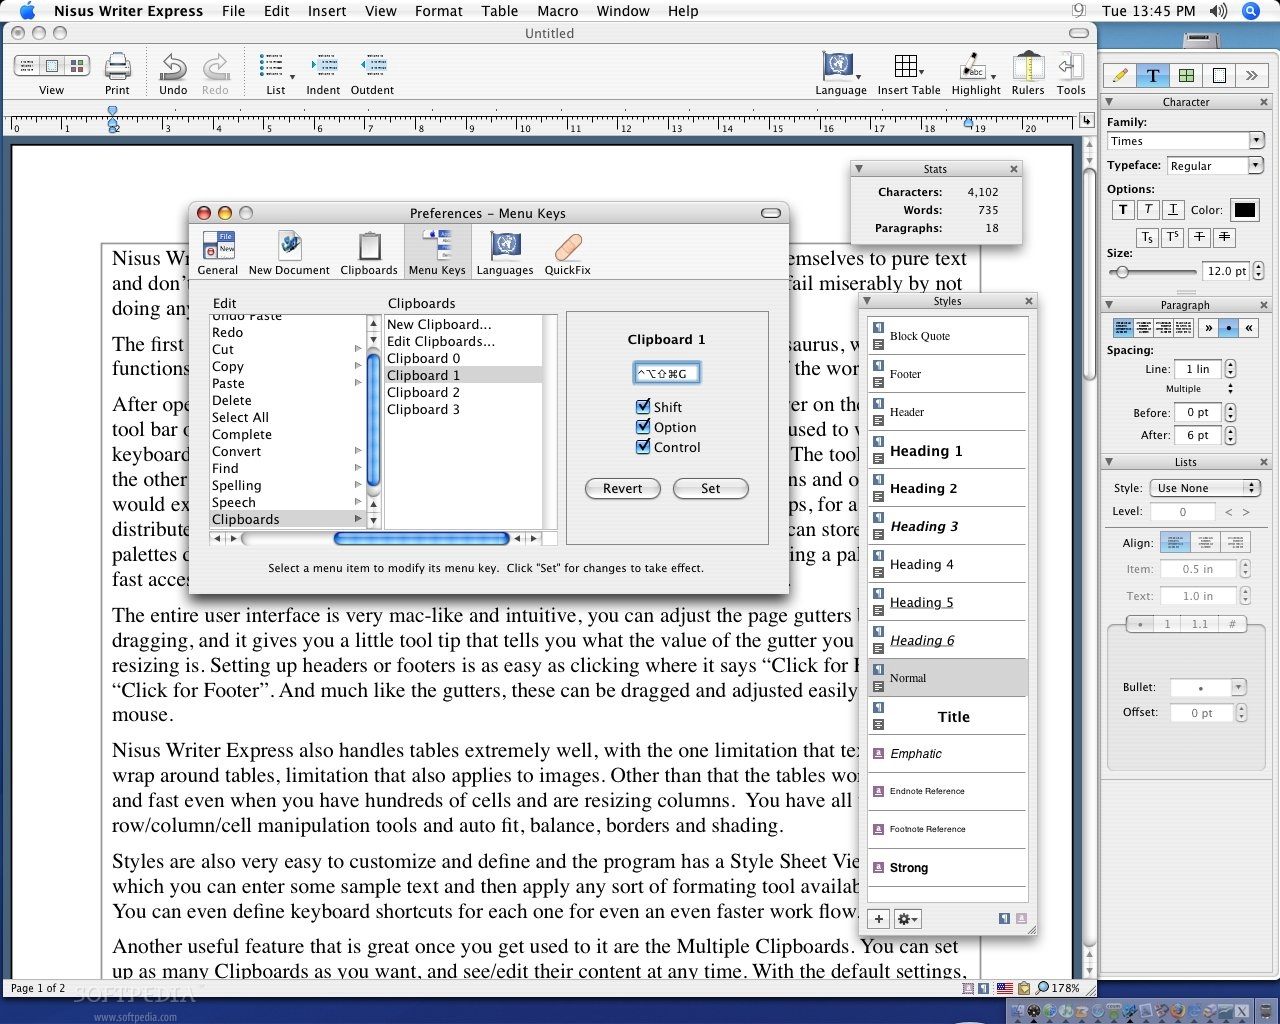 find italic text in nisus writer pro